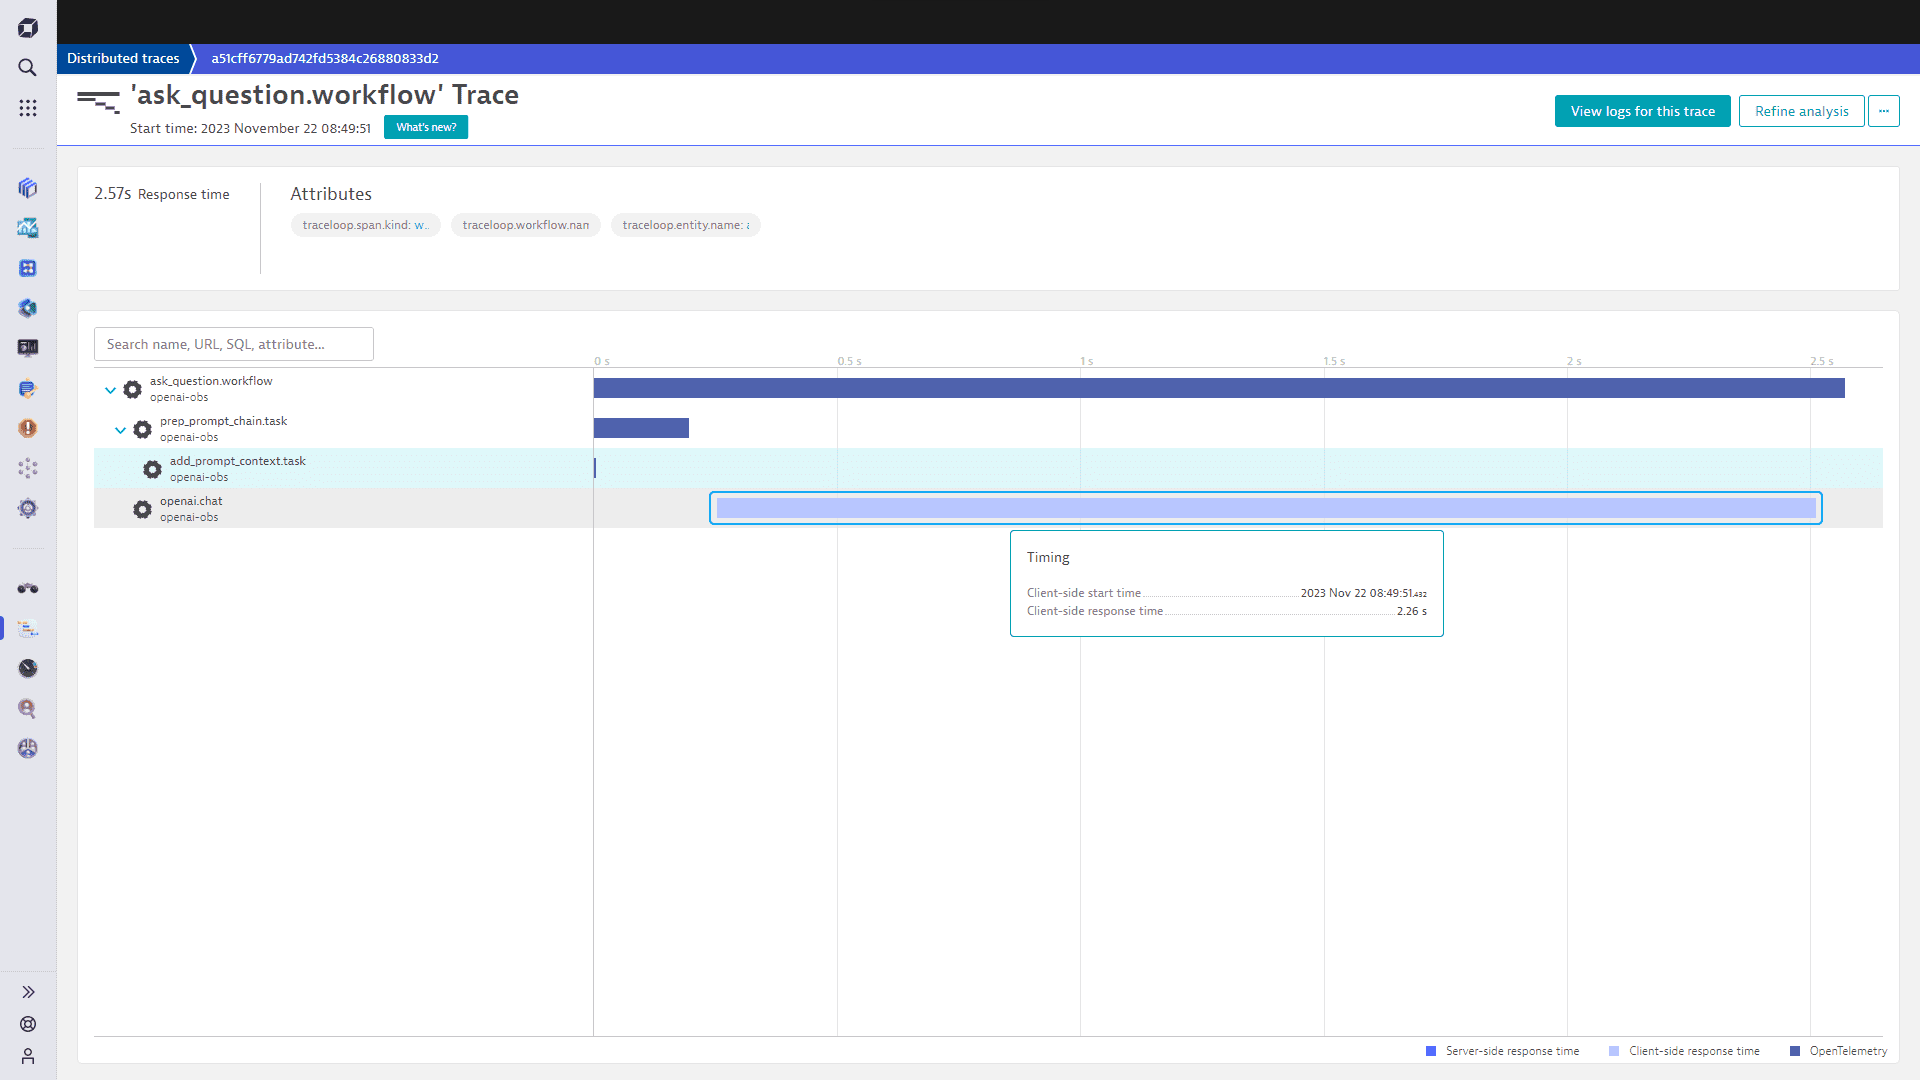 A traceloop trace collected and visualized in Dynatrace